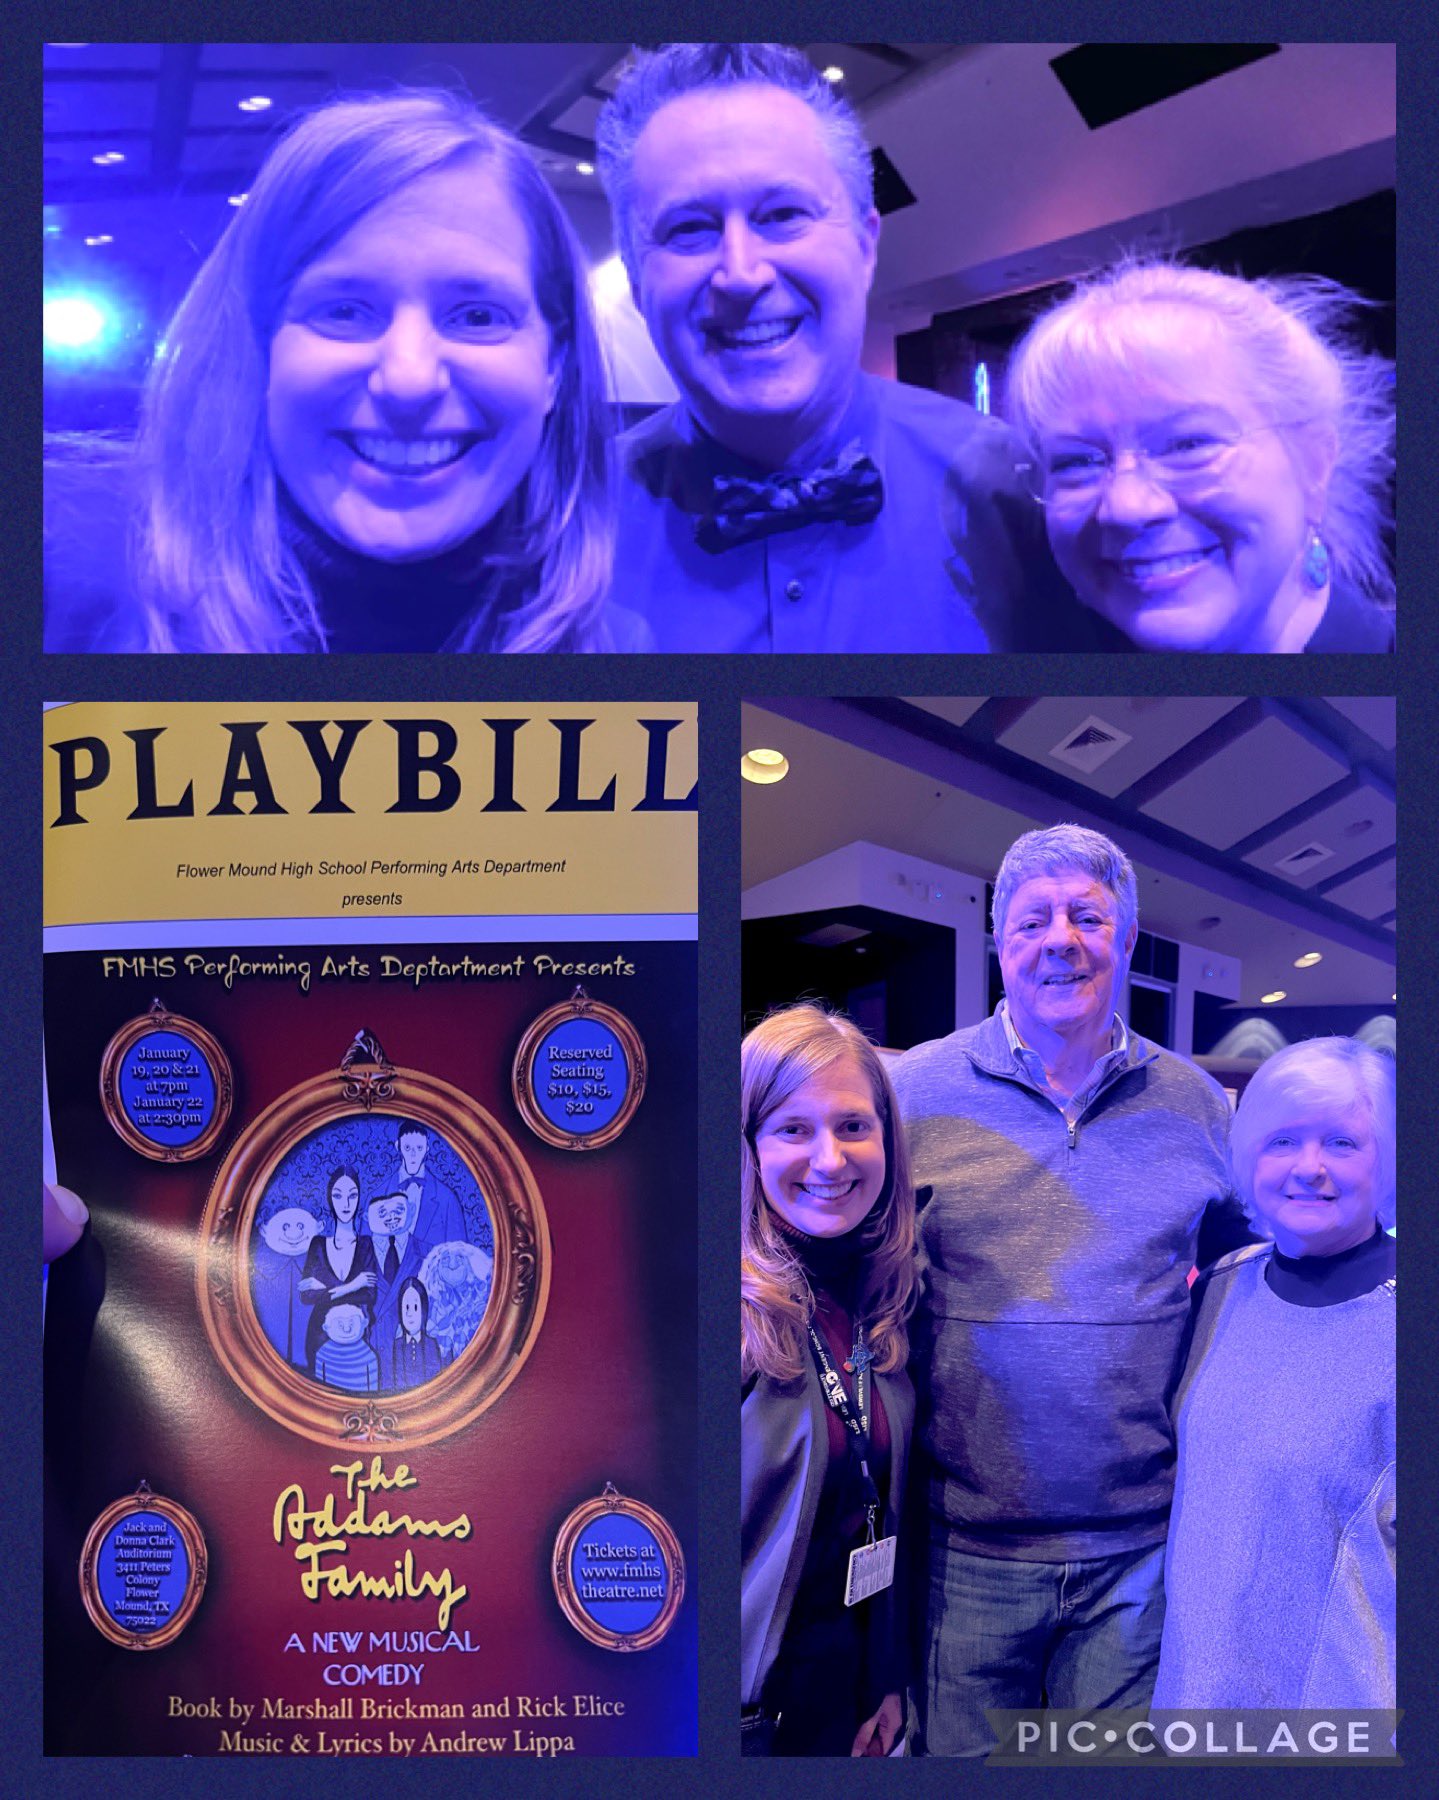 Lori Rapp on X: What a fun evening seeing the opening night for  @FlowerMoundHS Theatre production of The Addams Family! It was outstanding-  So proud of the students and staff! I also